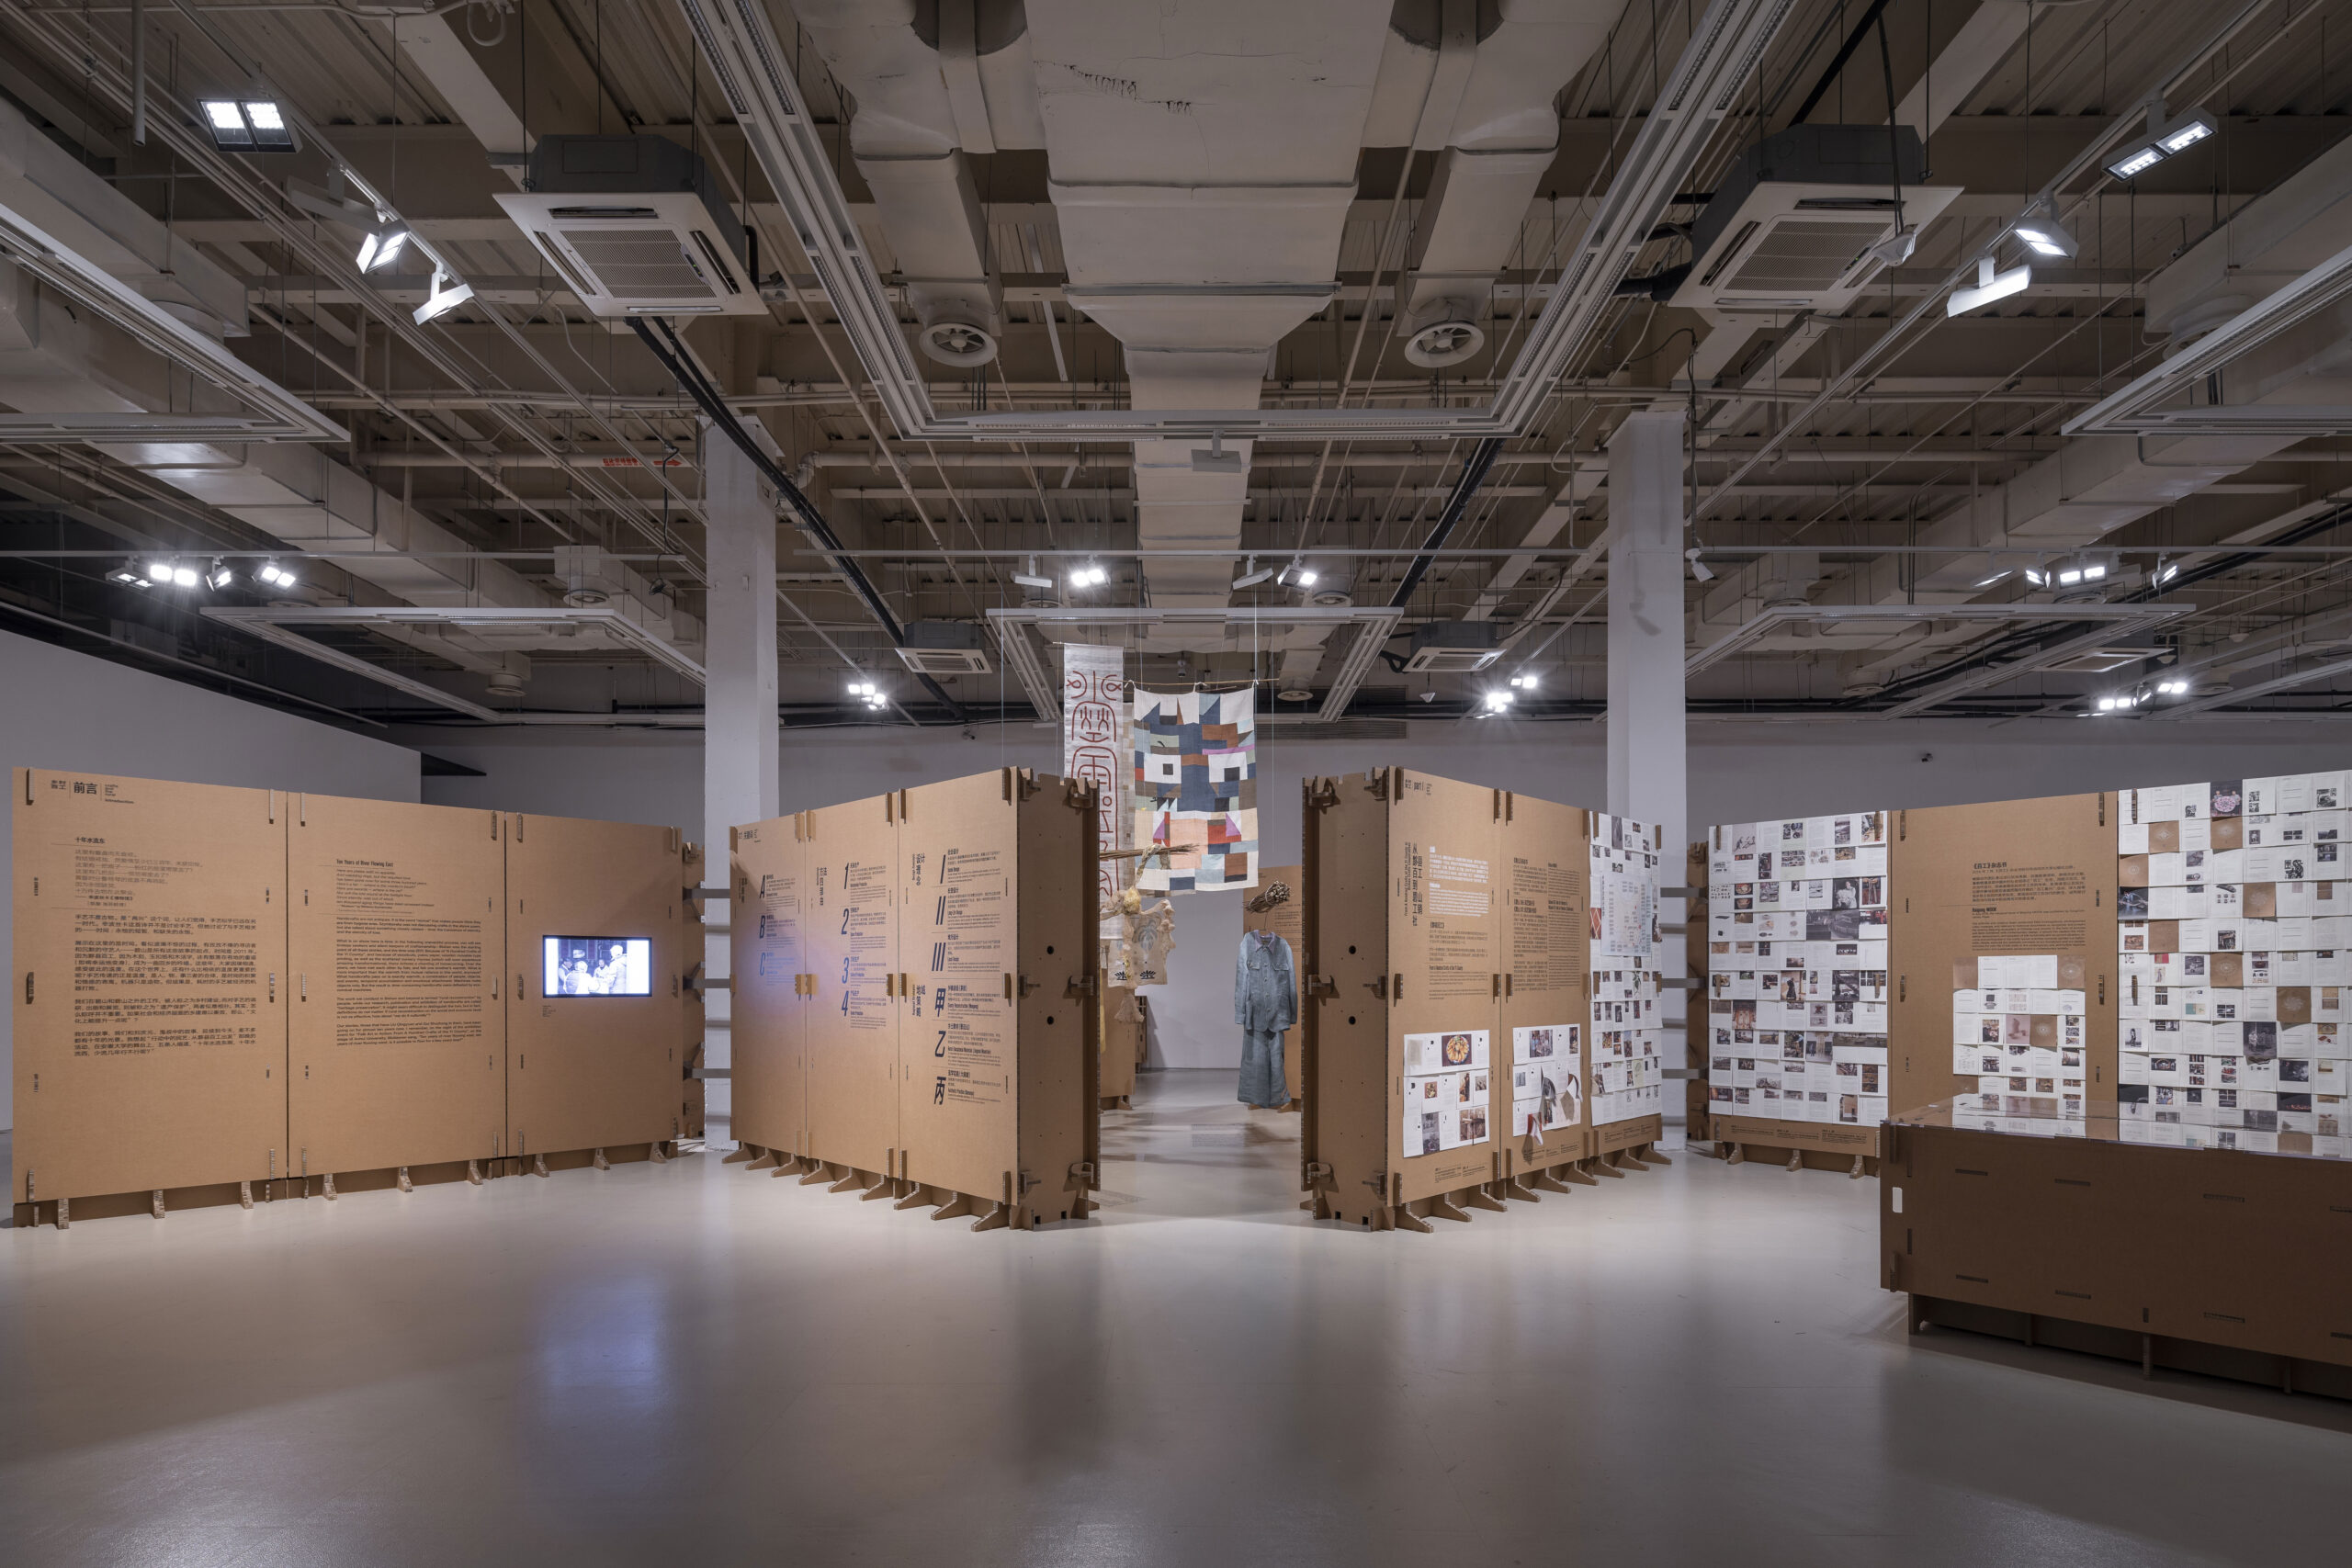 Corrugated Cardboard-Formed Exhibition Space, LUO studio